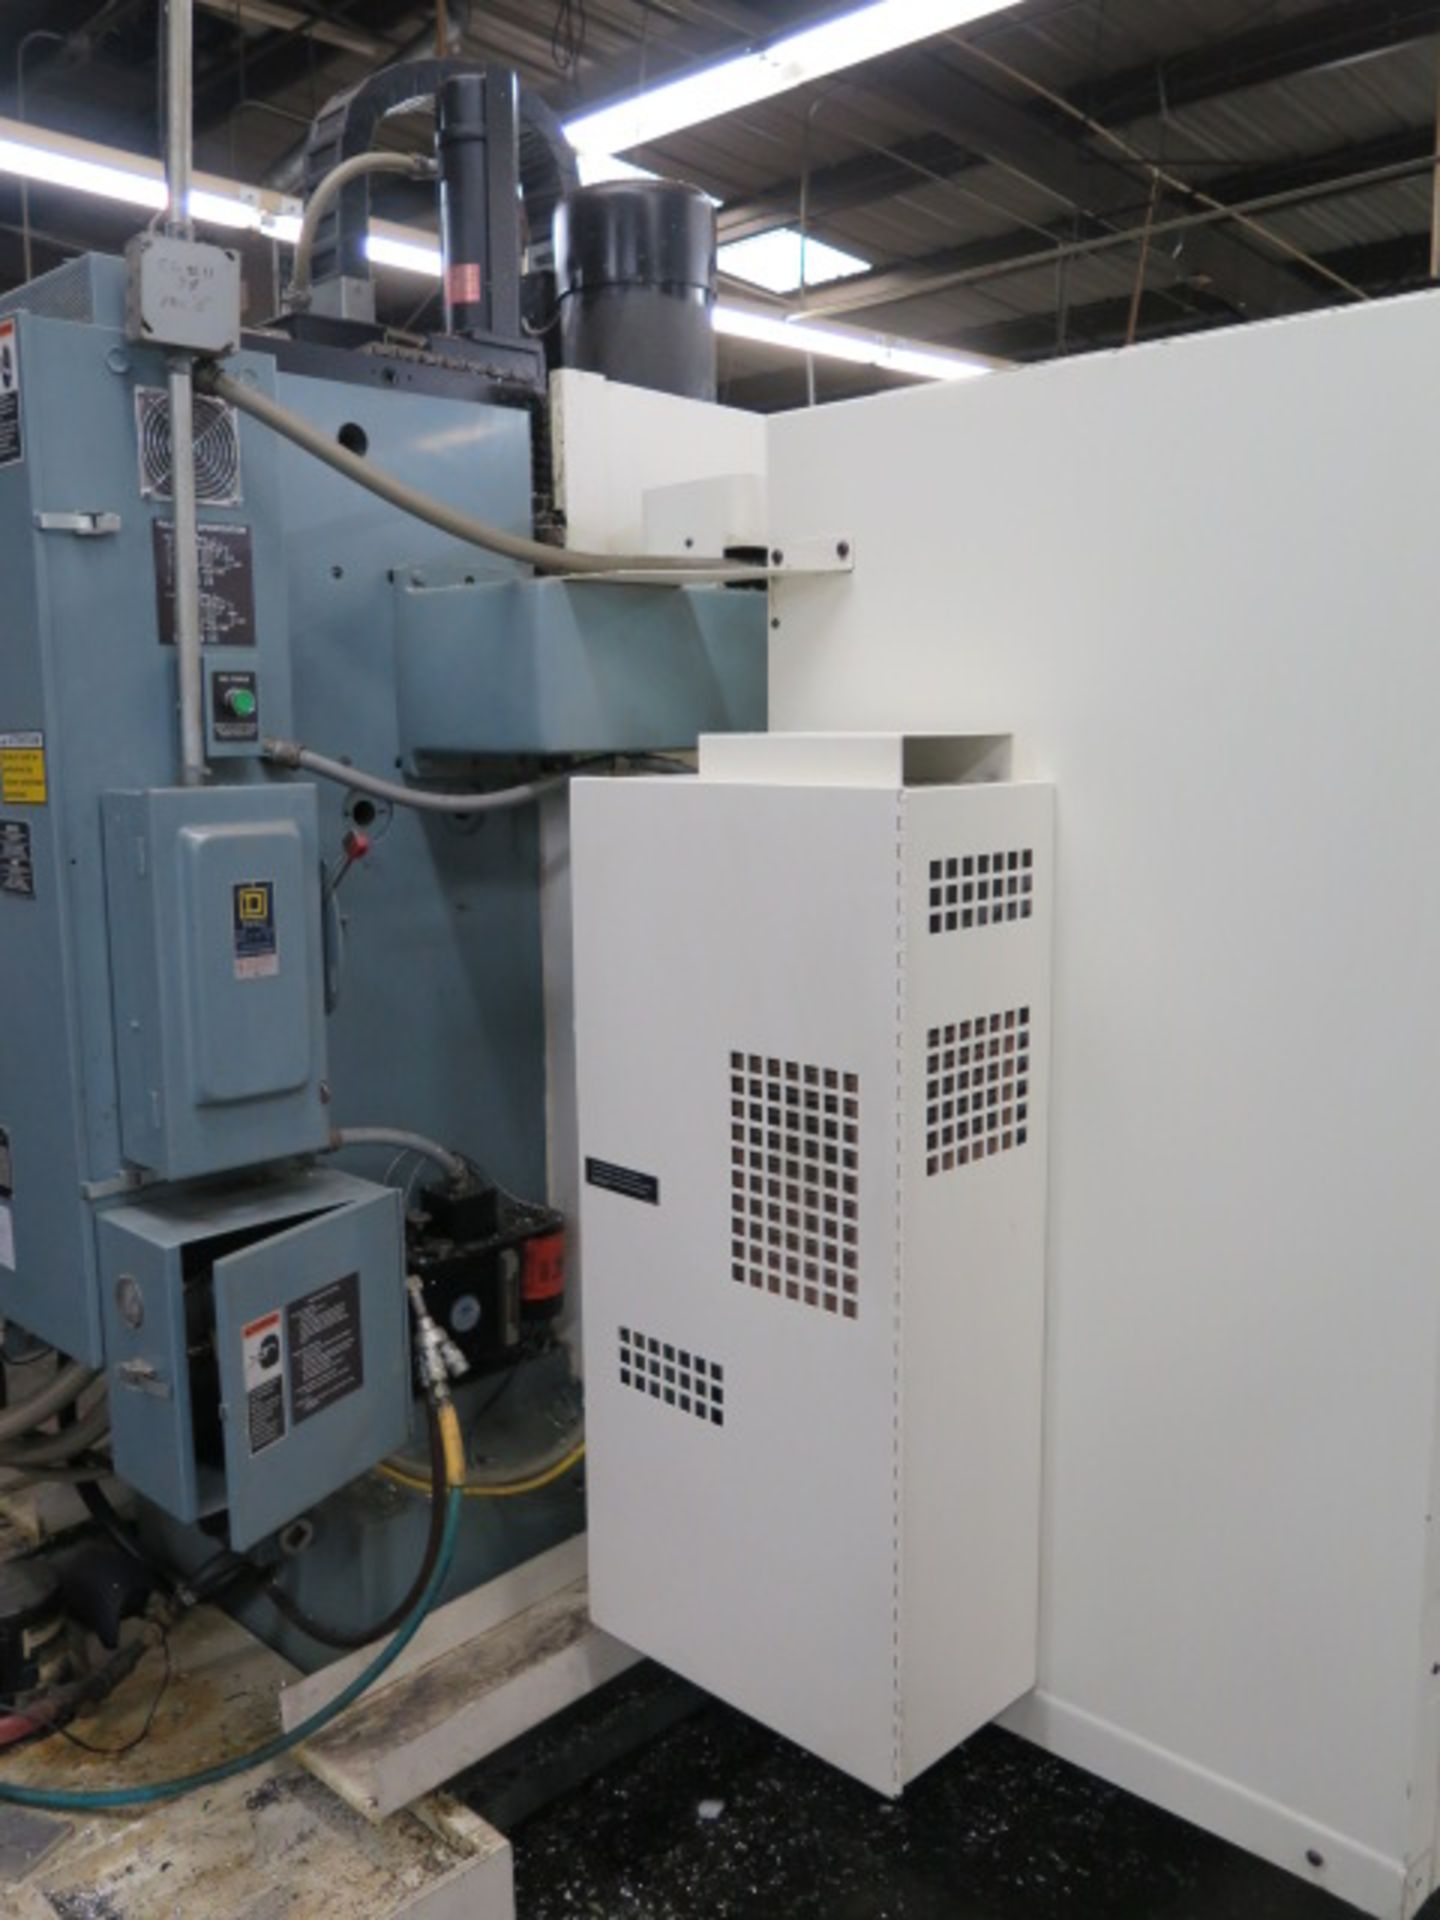 2013 Fadal VMC4020 CNC Vertical Machining Center s/n 1303070690 ( Wesco Factory Rebuilt in 2013 ) w/ - Image 10 of 12